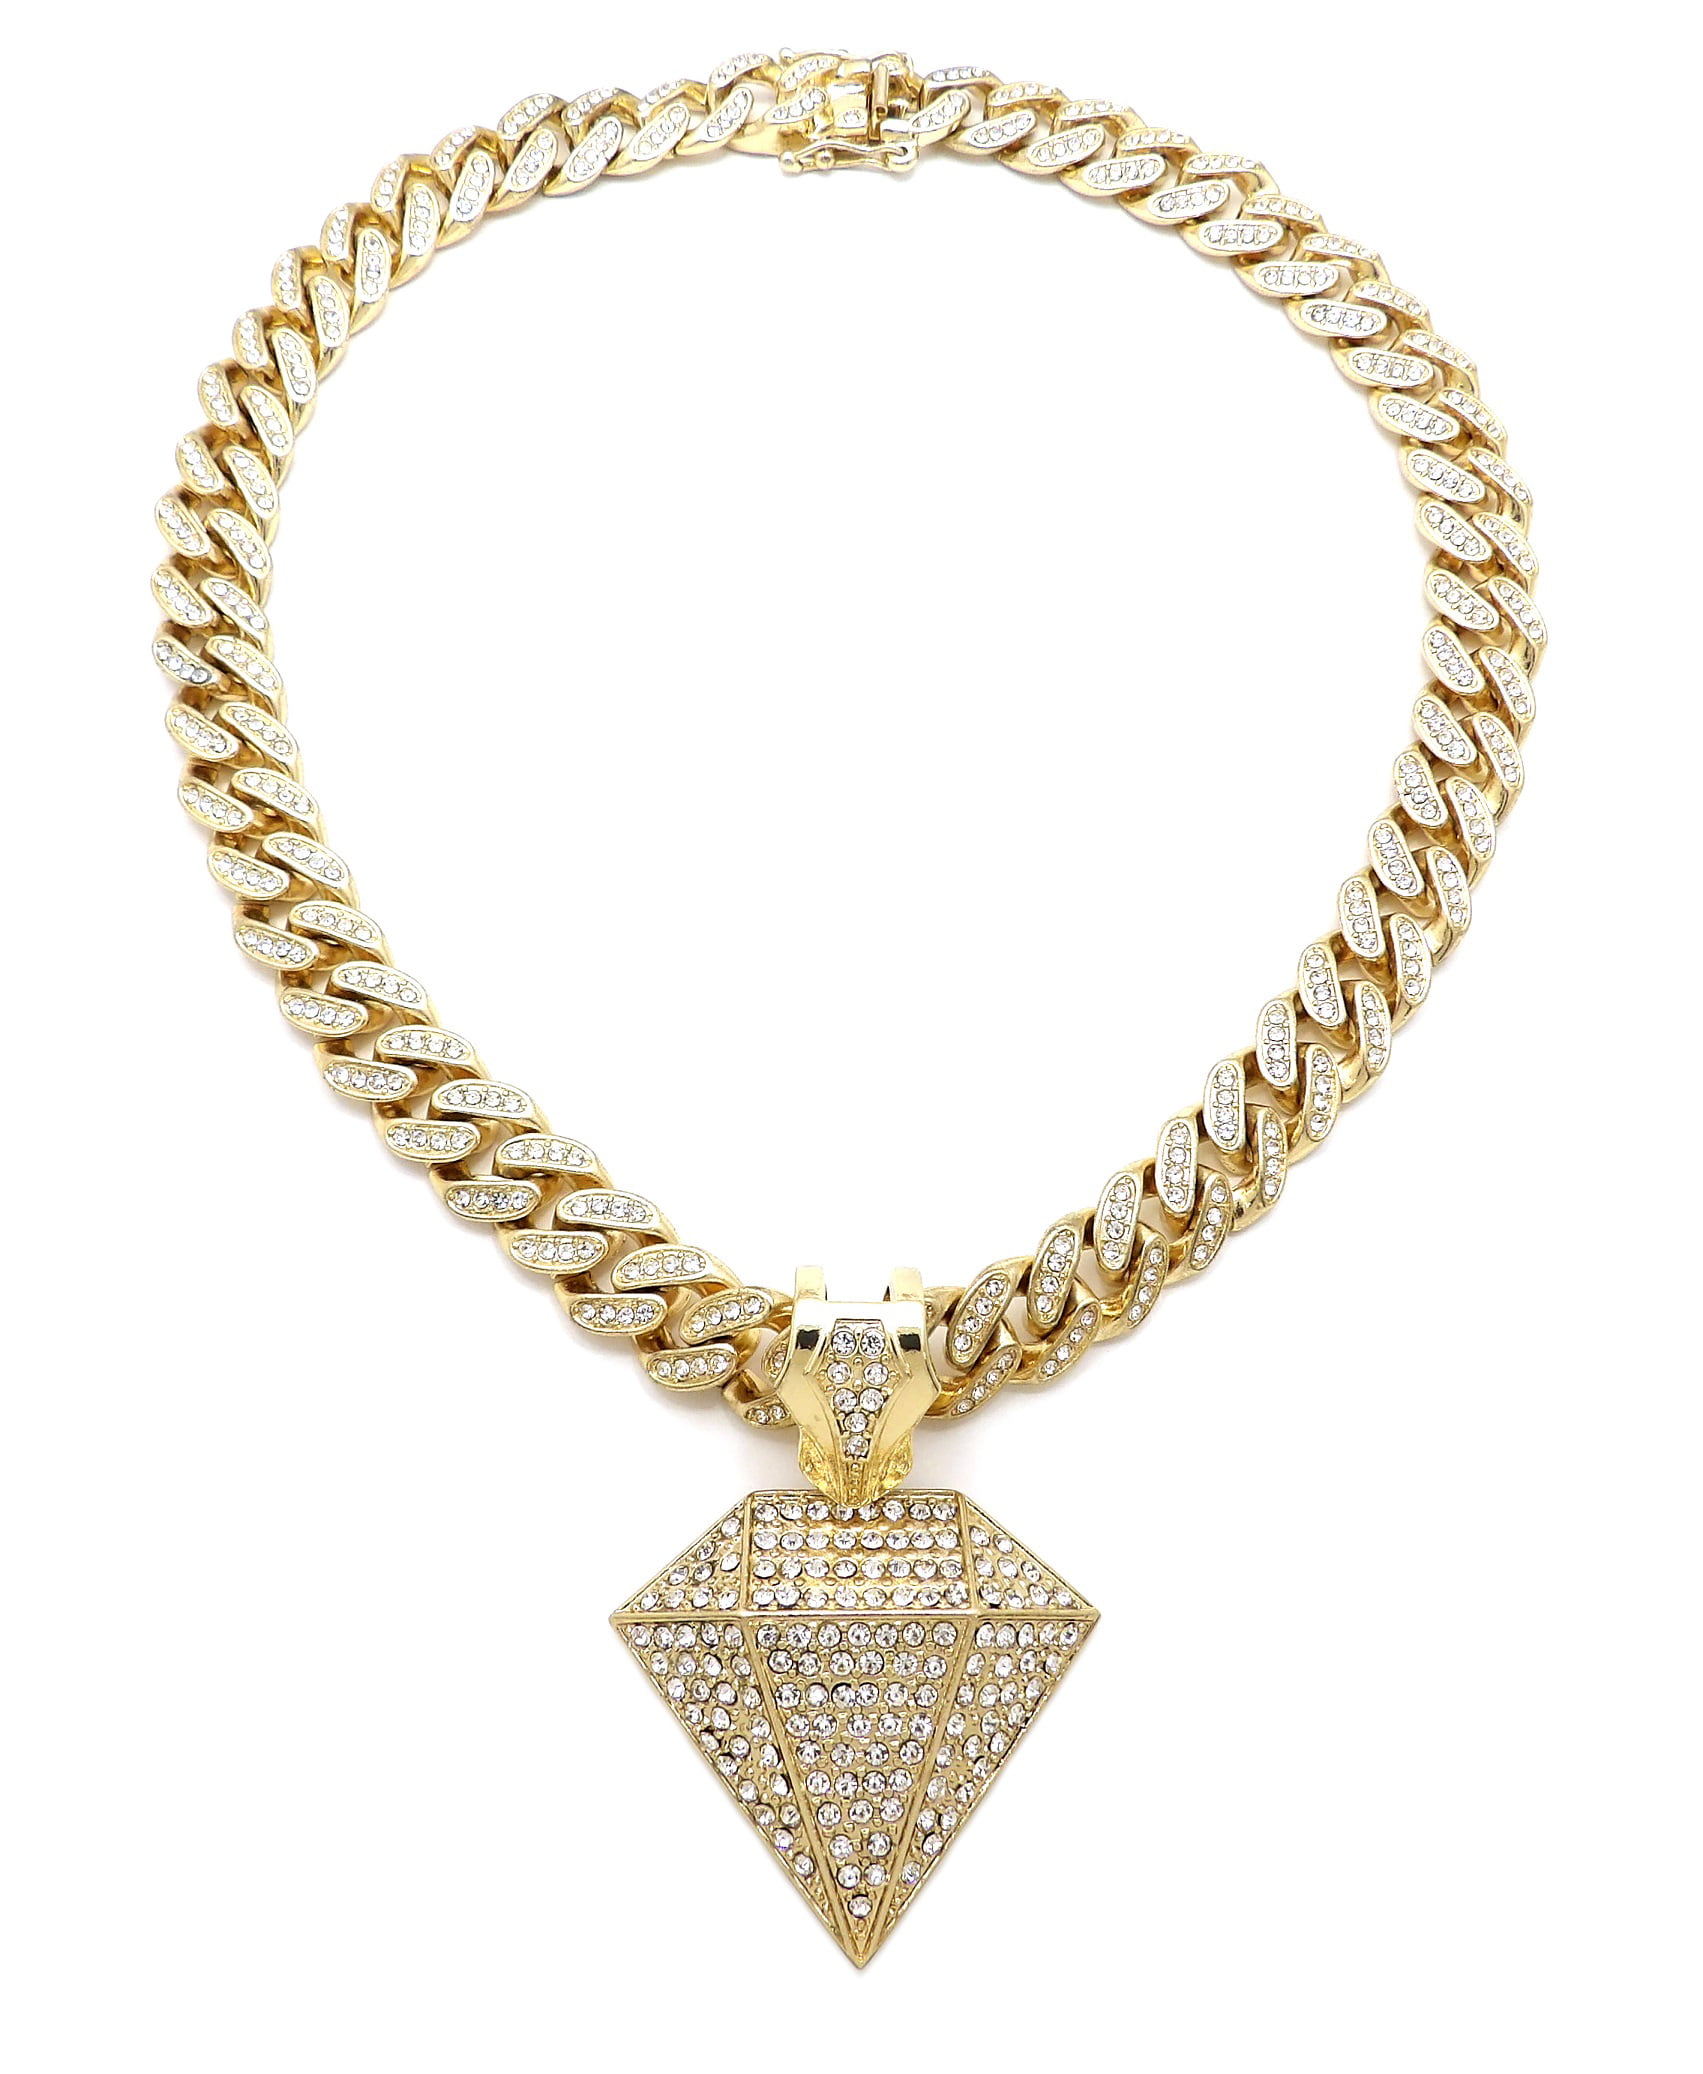 Iced Out Chain Necklace Best Sale, 59% OFF | www.pegasusaerogroup.com